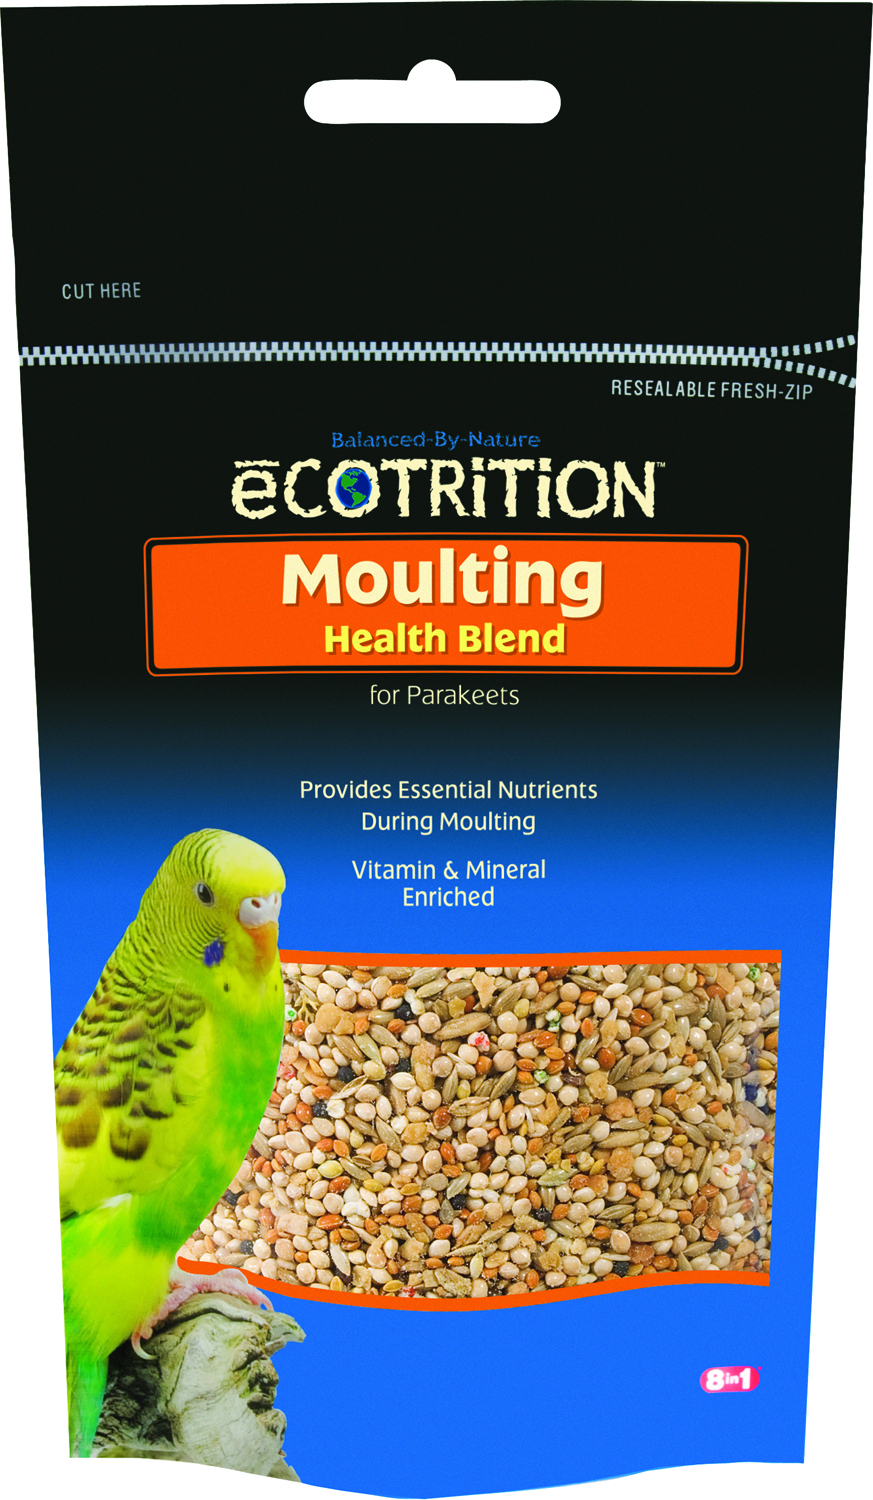 ULTRACARE MOULTING HEALTH BLEND